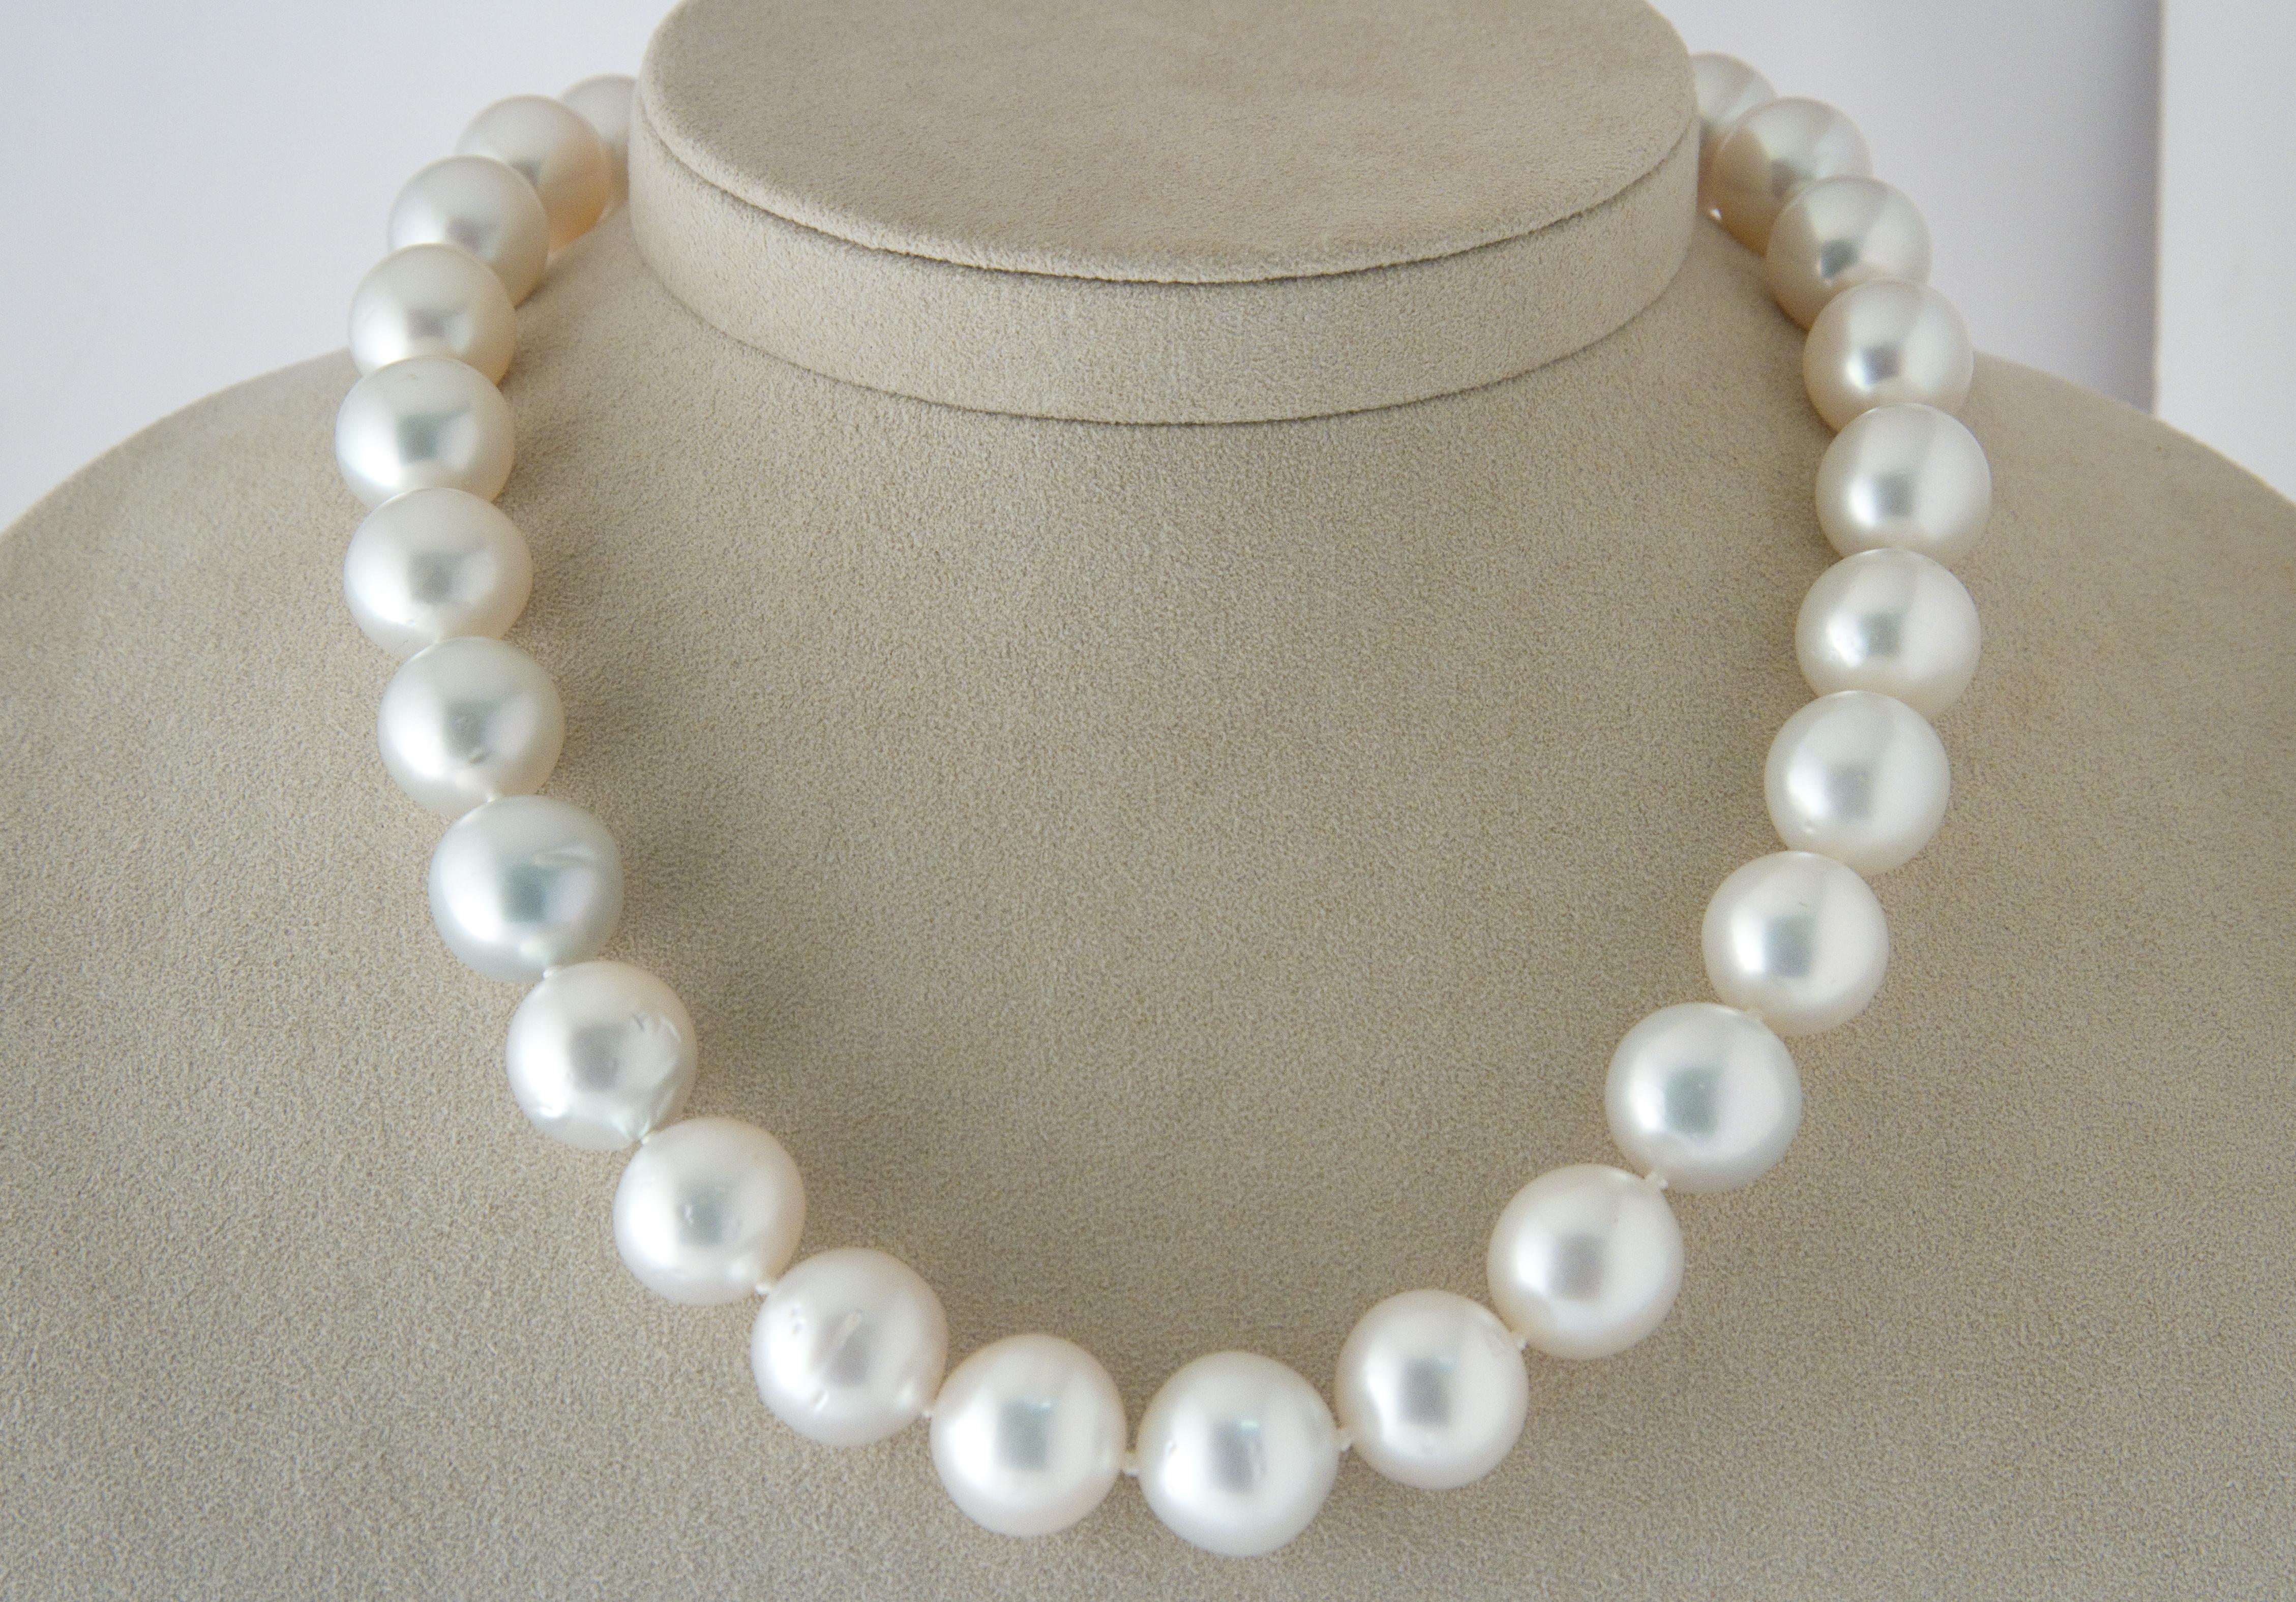 Contemporary South Sea Pearl Necklace with Claps Diamonds on White Gold 18 Karat